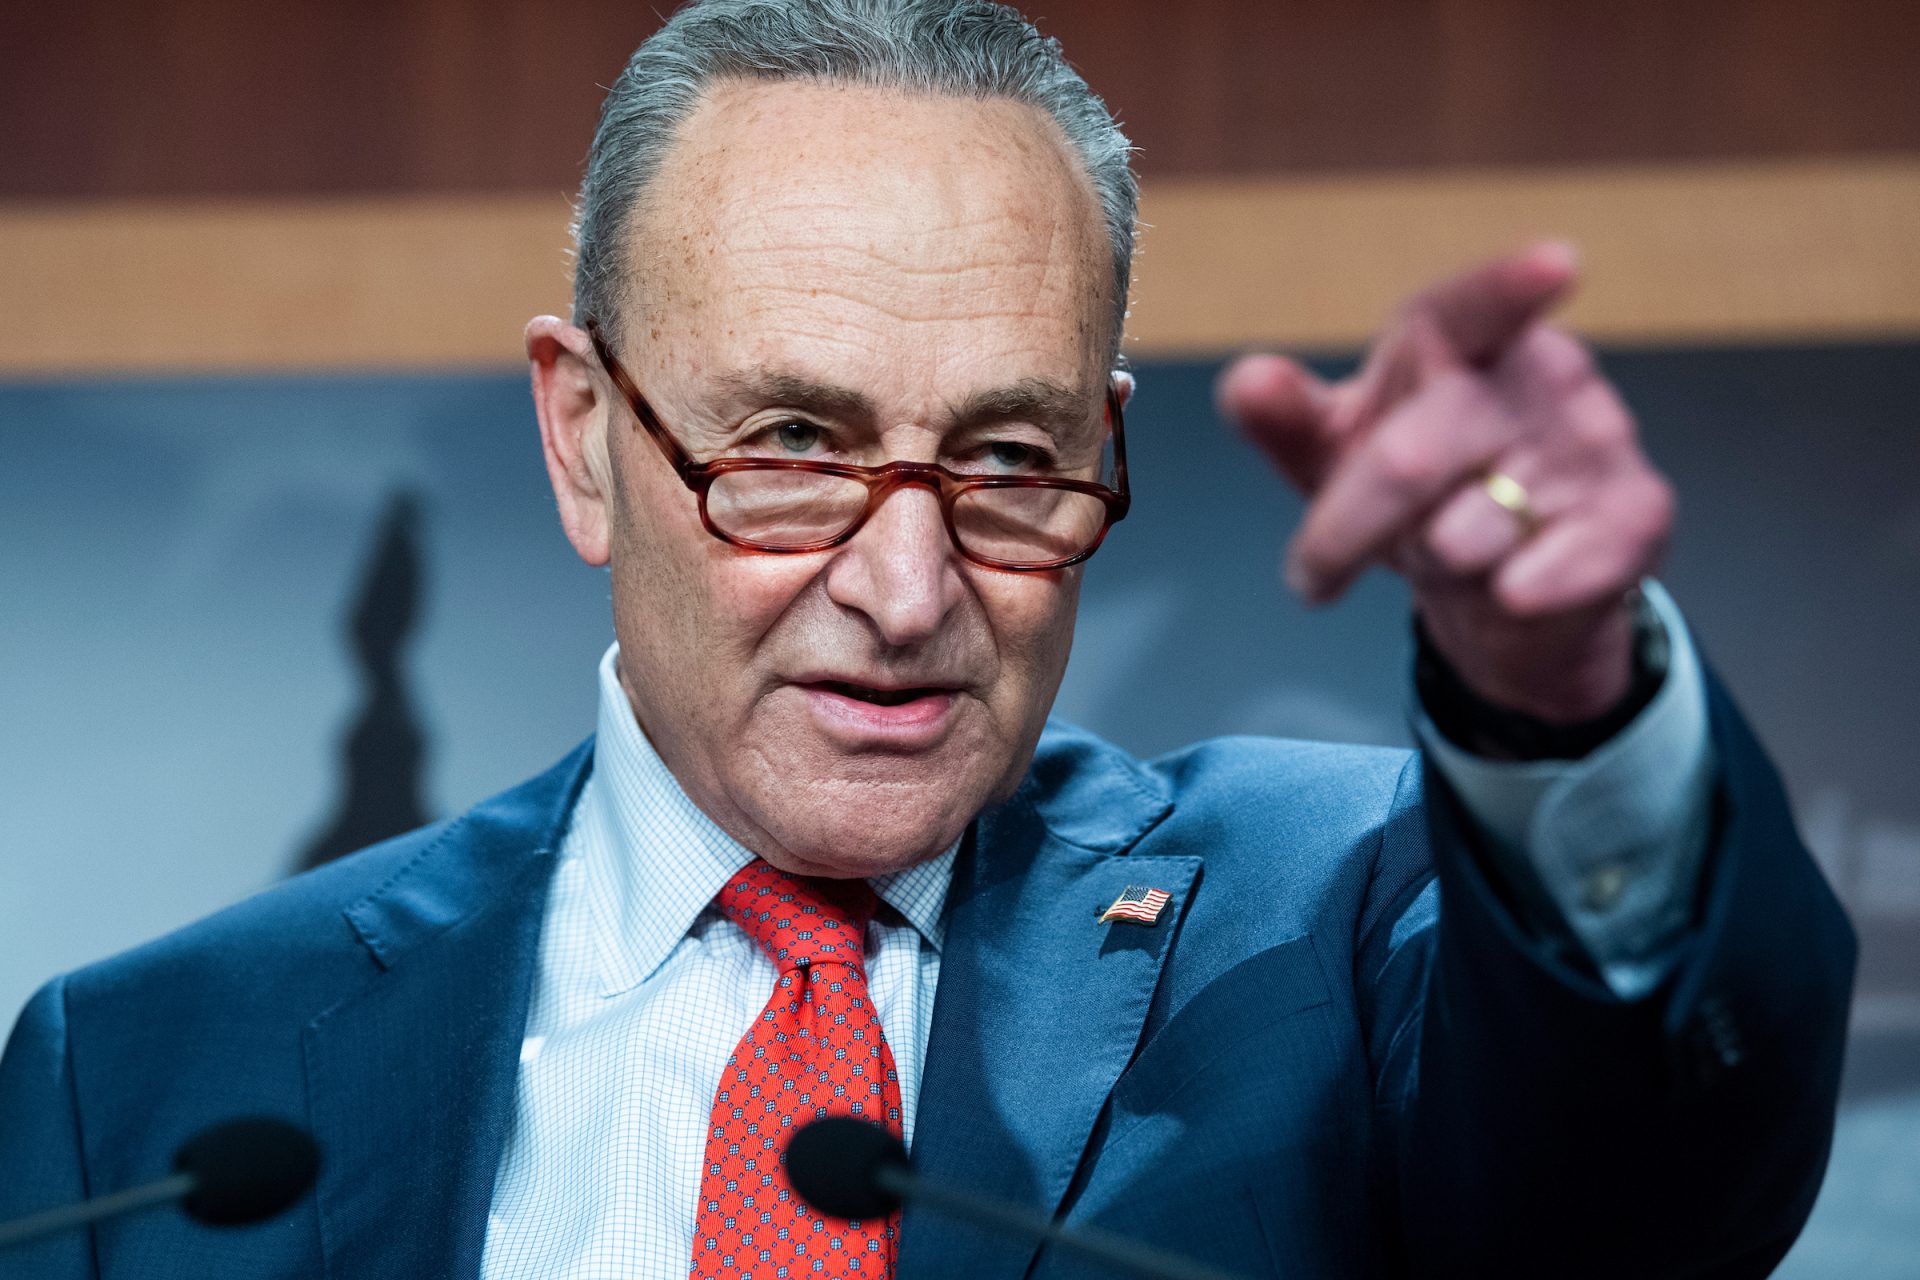 Democrats kick off worth range assignment for filibuster-proof virus attend